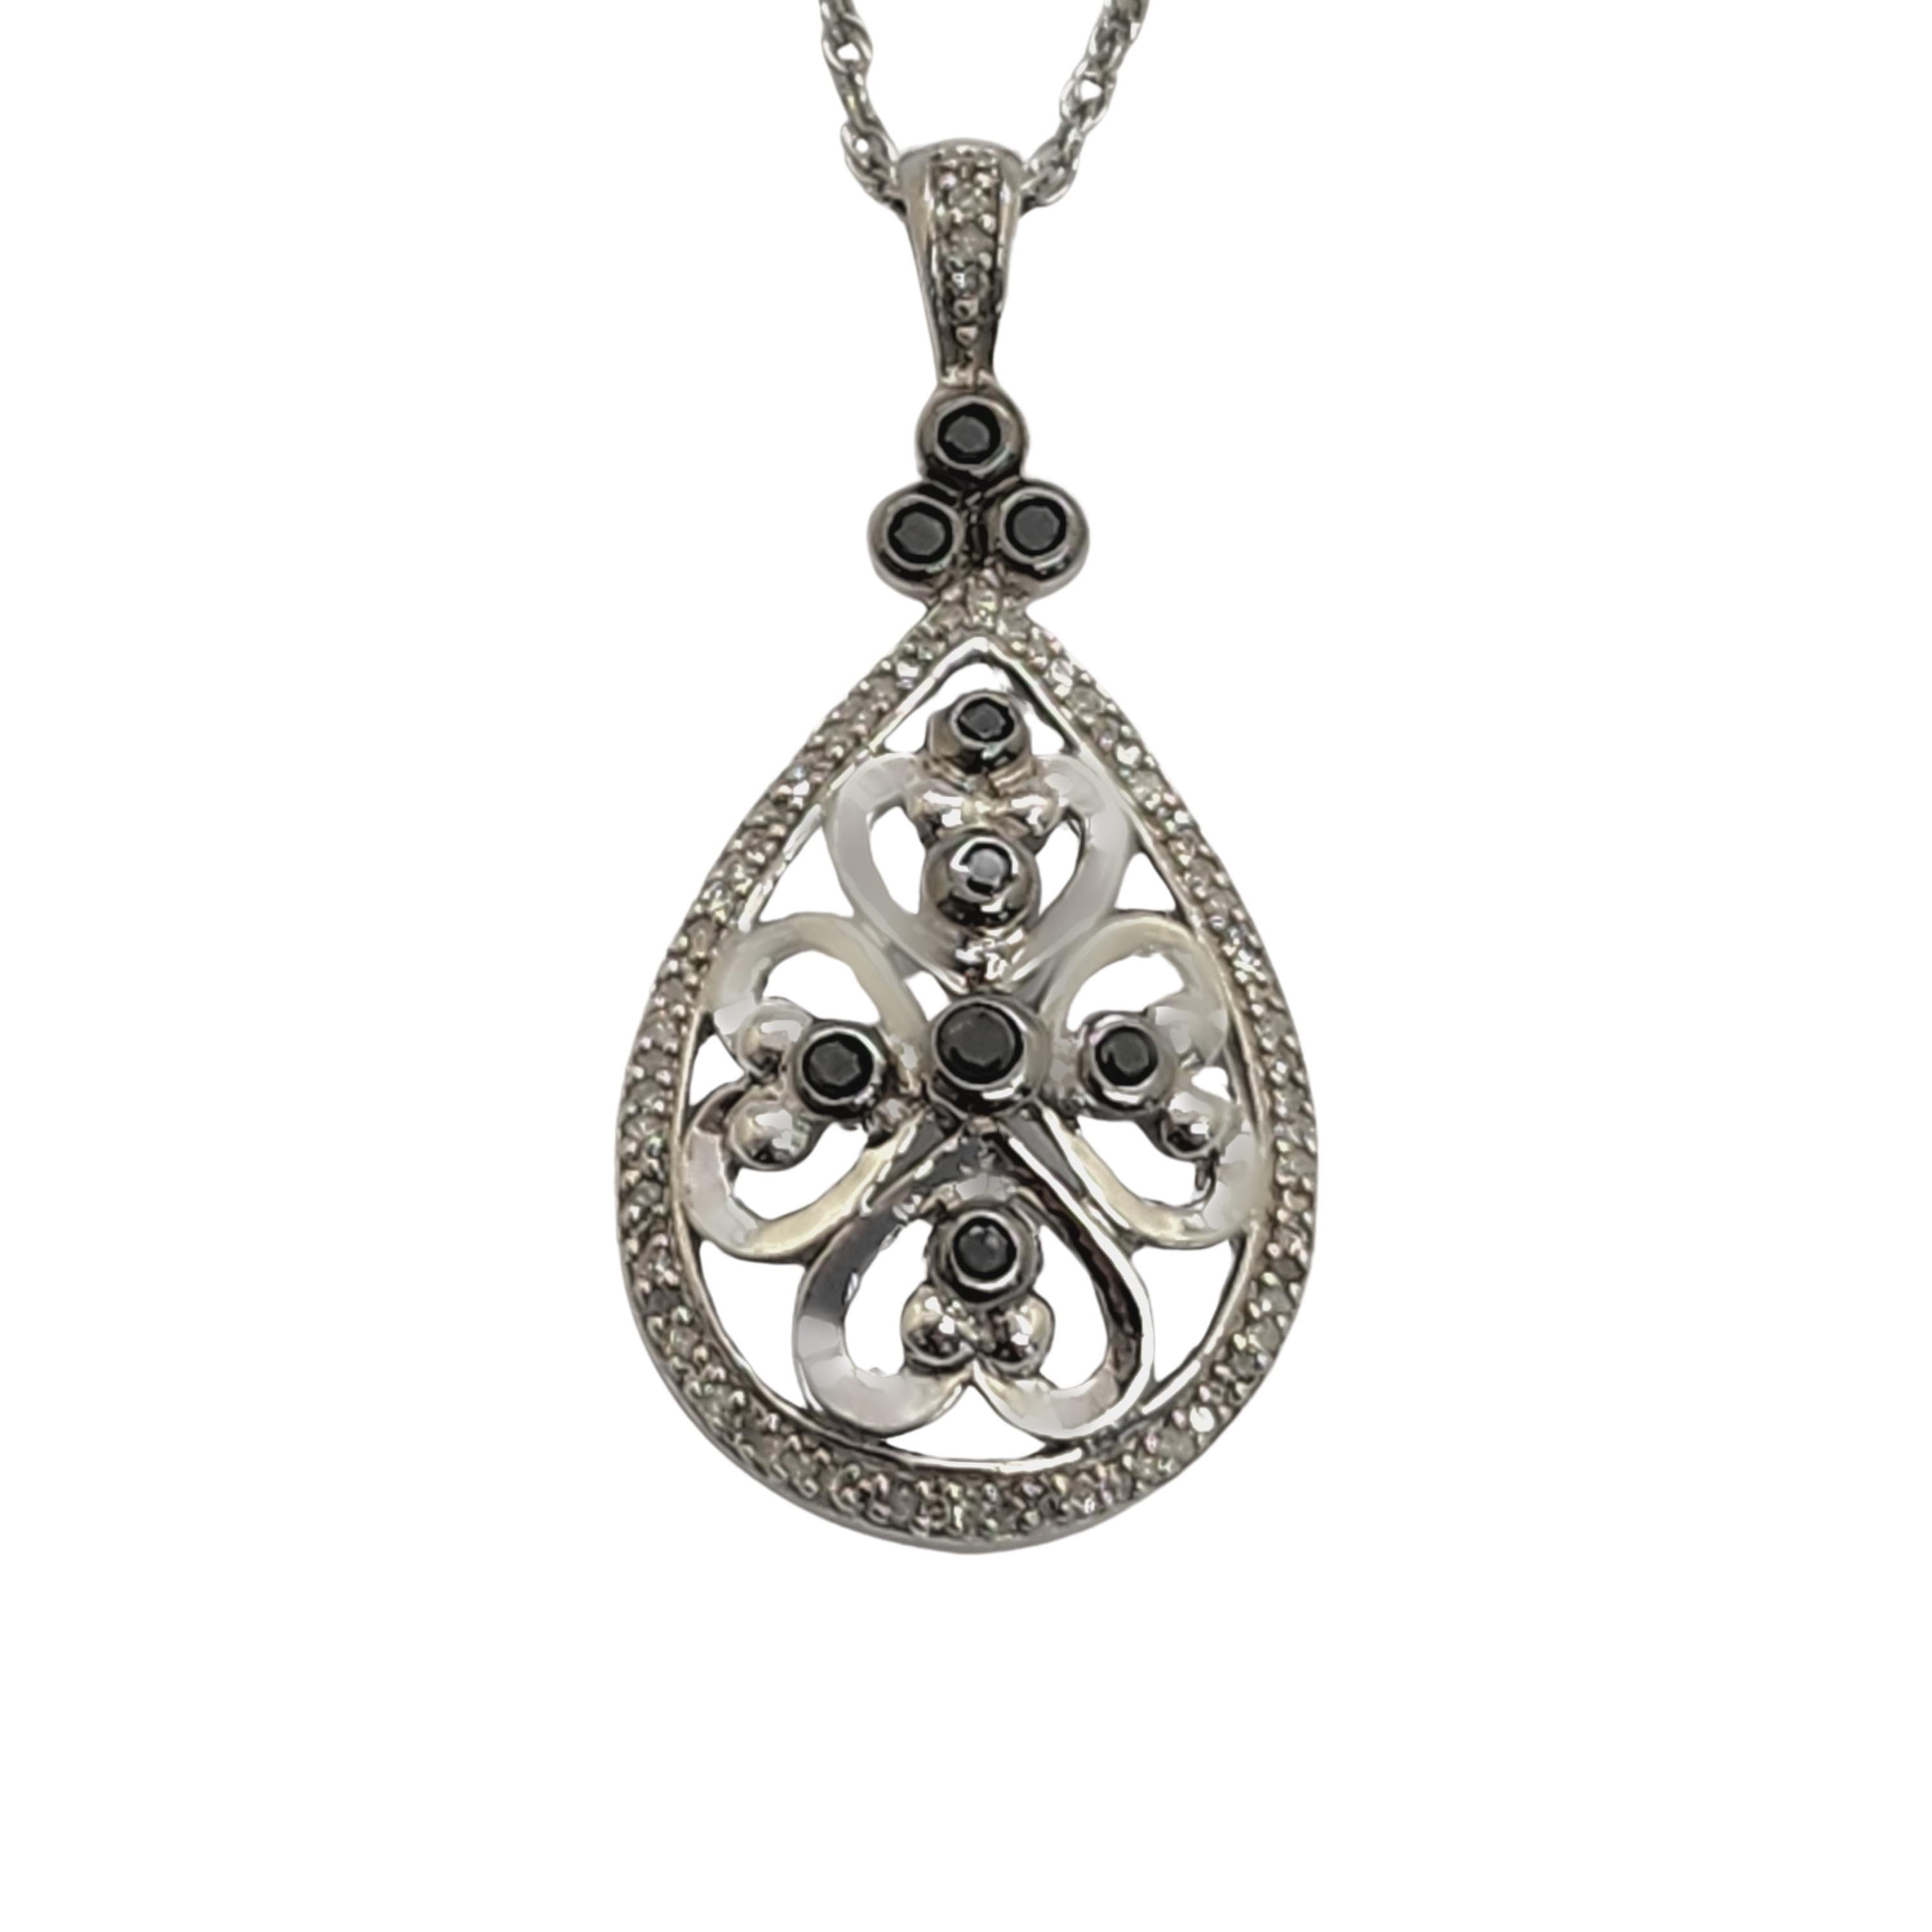 Kay Jewelers sterling silver black and white diamond pendant necklace.

Open work teardrop shaped pendant features heart designs and round black diamonds. Very small white diamonds frame the pendant. Delicate rope twist chain.

Chain measures approx